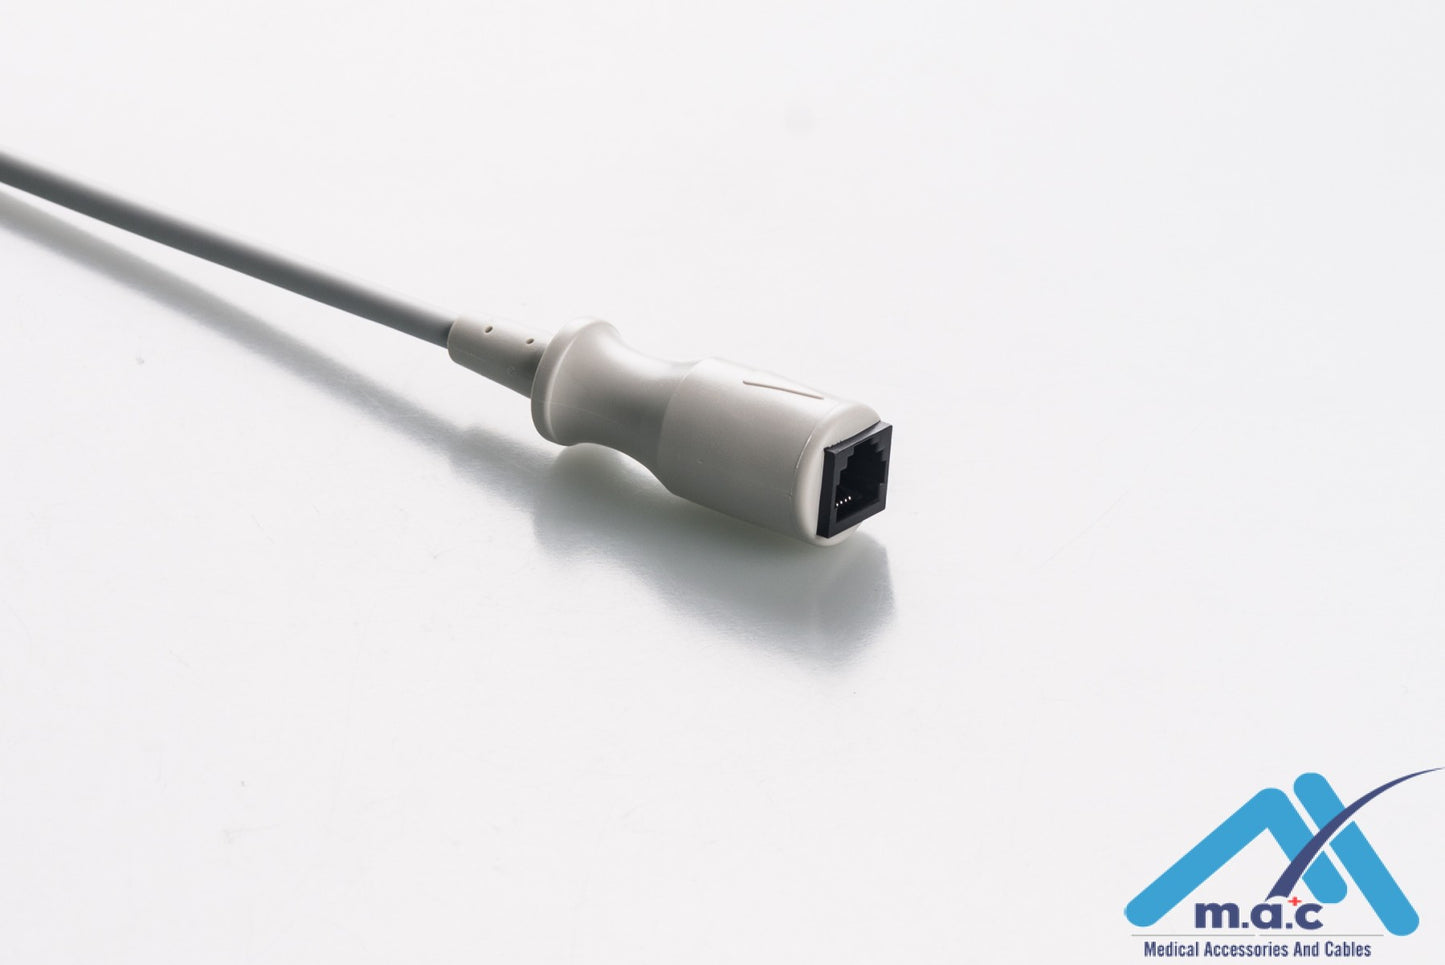 IBP Adapter Cable For Transducer BCM-MQ-MX BCM-MQ-ED BCM-MQ-UT BCM-MQ-BD BCM-MQ-BB BCM-MQ-MX1